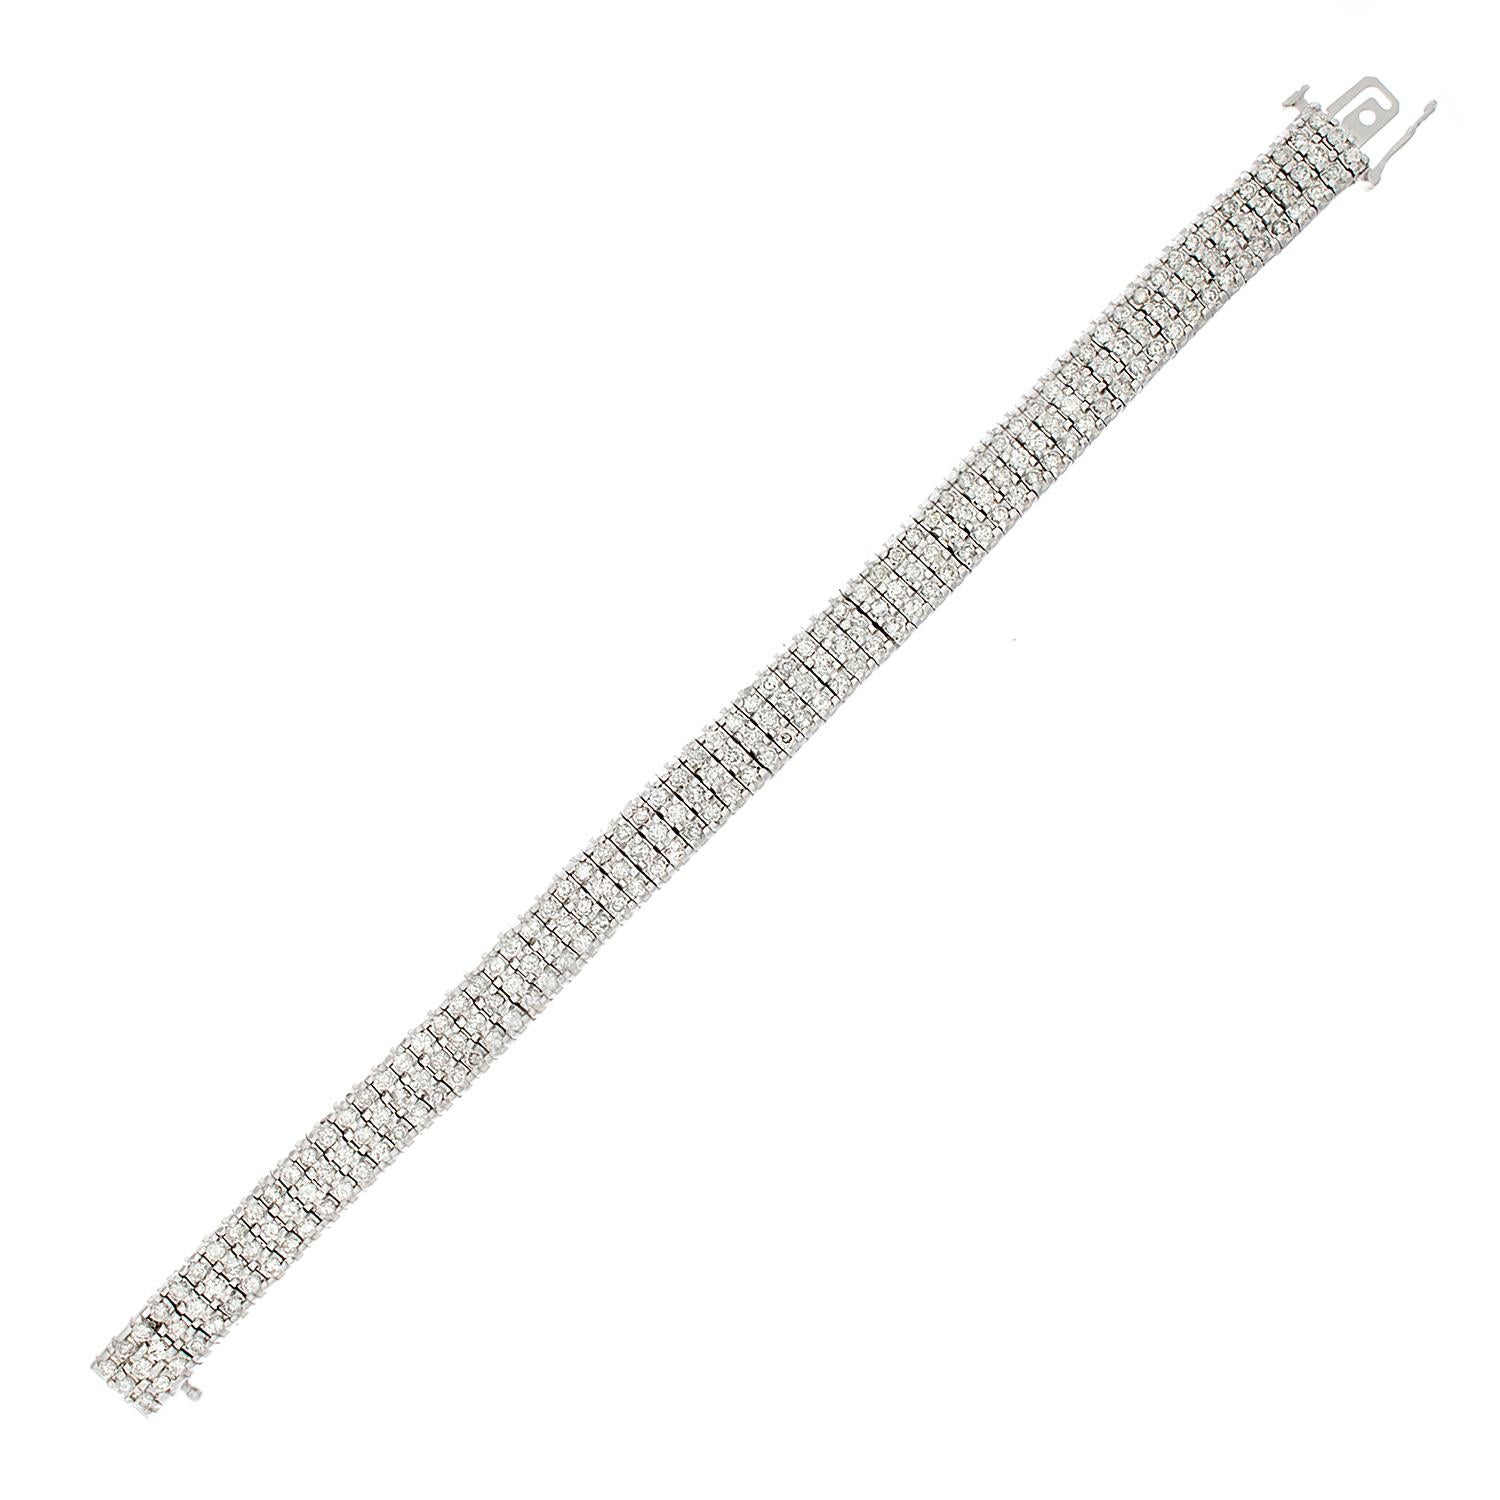 This tri-row bracelet features 7 carats of glistening white diamonds set in 14K white gold. This everyday bracelet is the perfect accompaniment to any outfit.

Fits wrists up to 7.15 inches